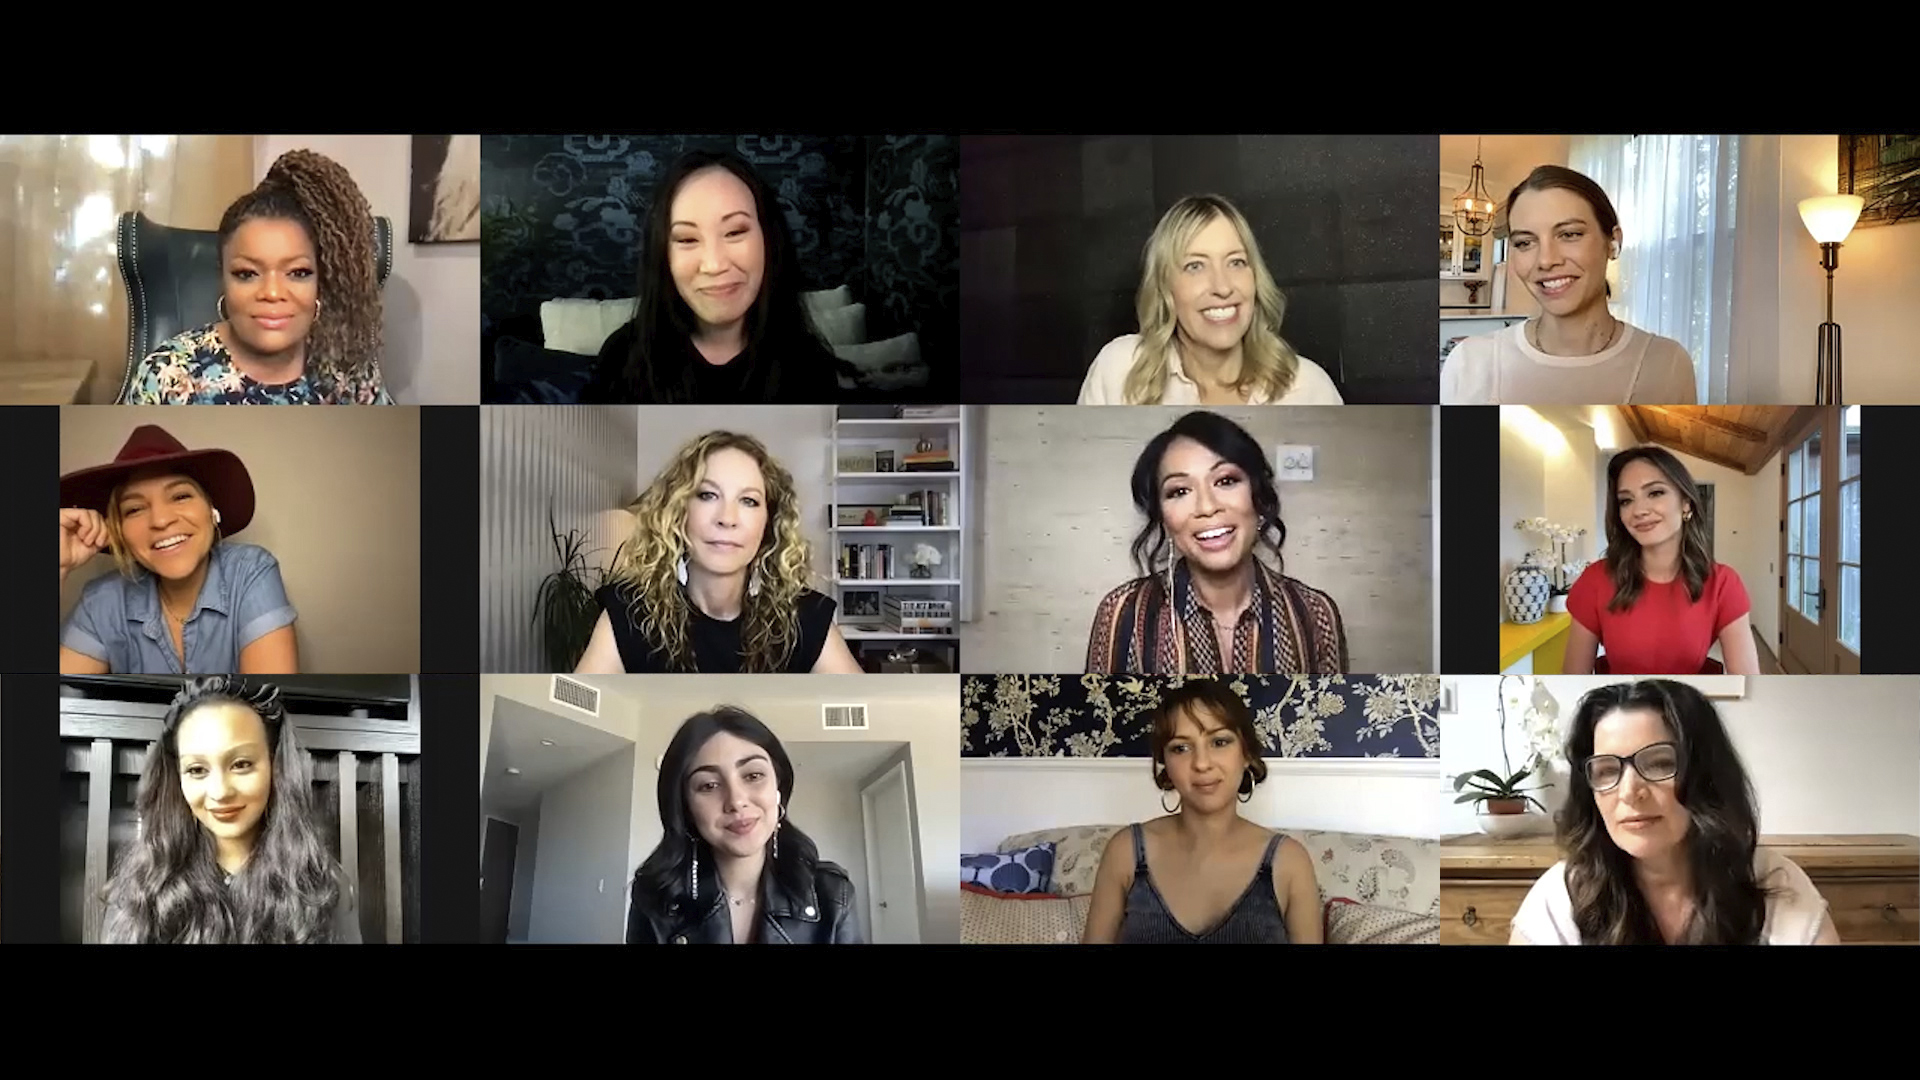 The Badass Women of TWDU: NY Comic Con 2021, The cast and crew discuss storylines and representation., TV-14, Season 1031277, Episode 10